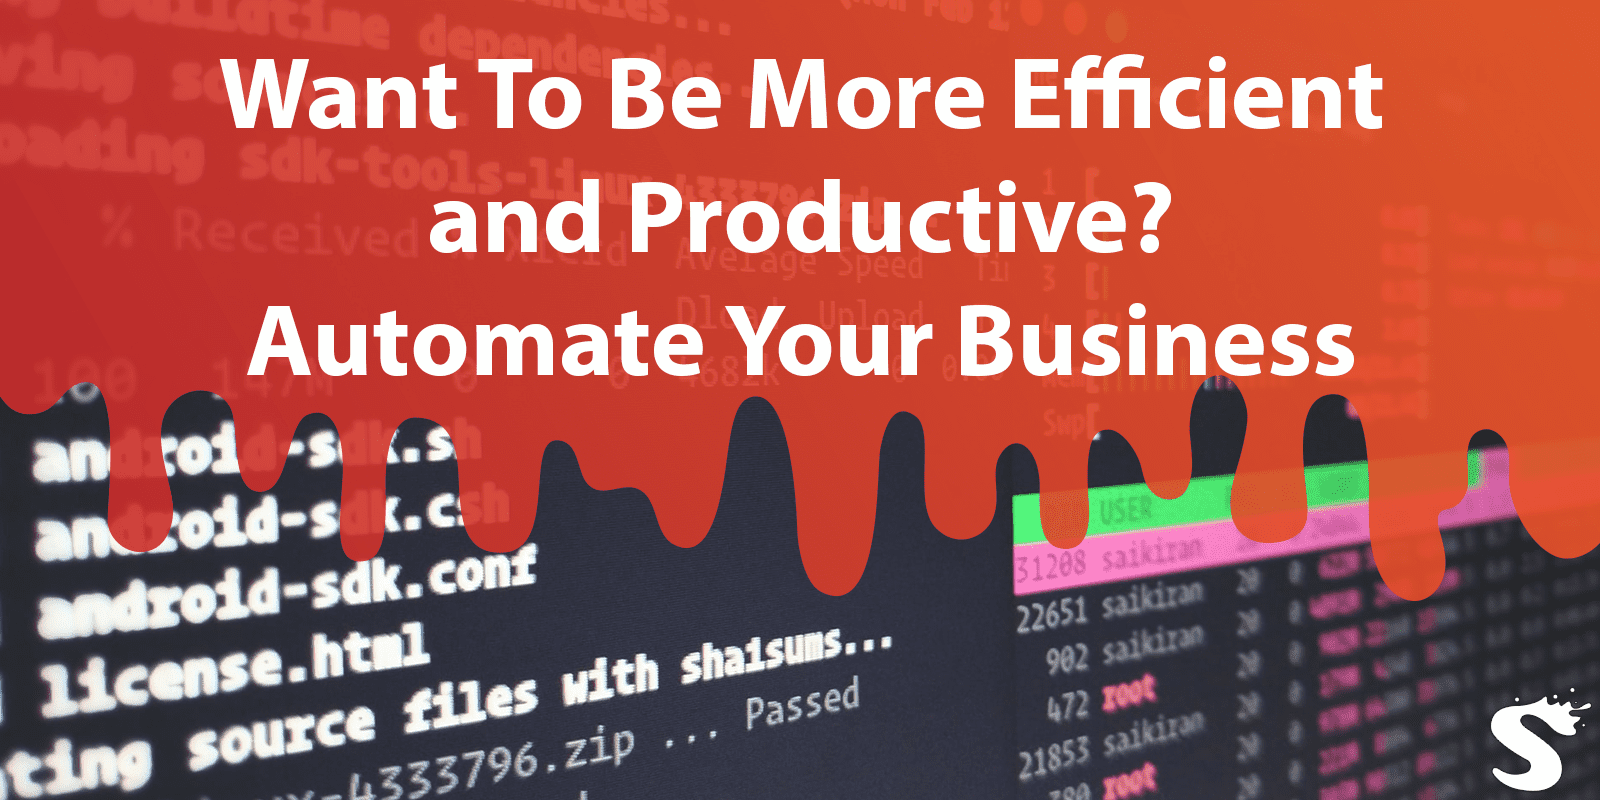 Want To Be More Efficient and Productive? Automate More of Your Business